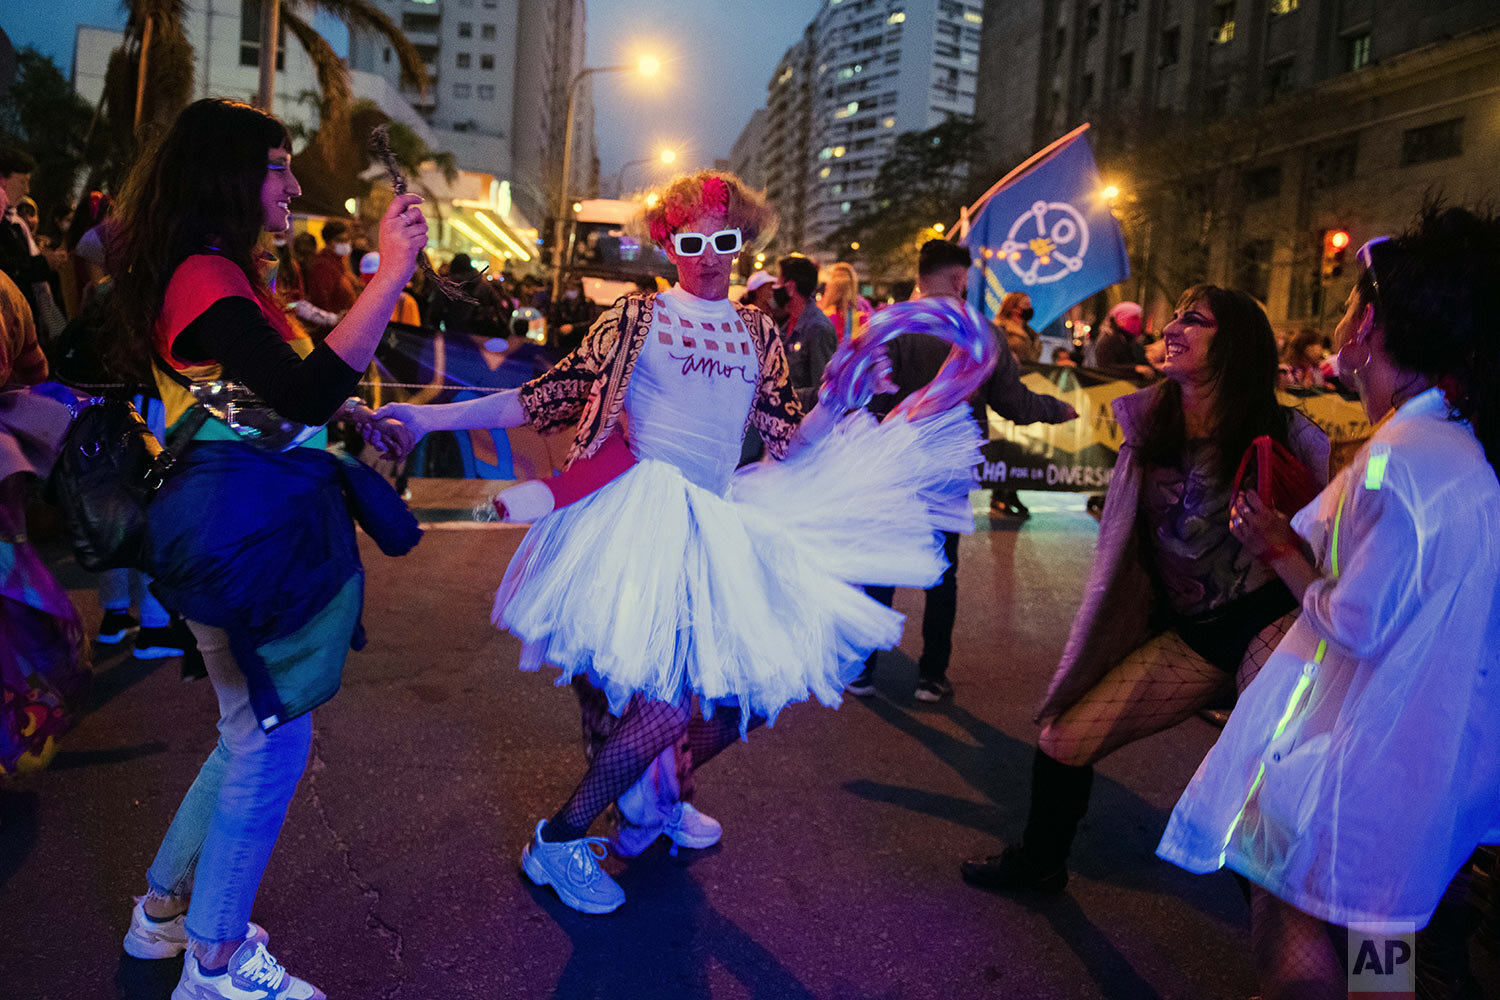  A person in costume strikes a pose during a diversity parade in Montevideo, Uruguay, Sept. 24, 2021. The annual event aims to raise awareness and fight discrimination based on sexual identity and orientation. (AP Photo/Matilde Campodonico) 